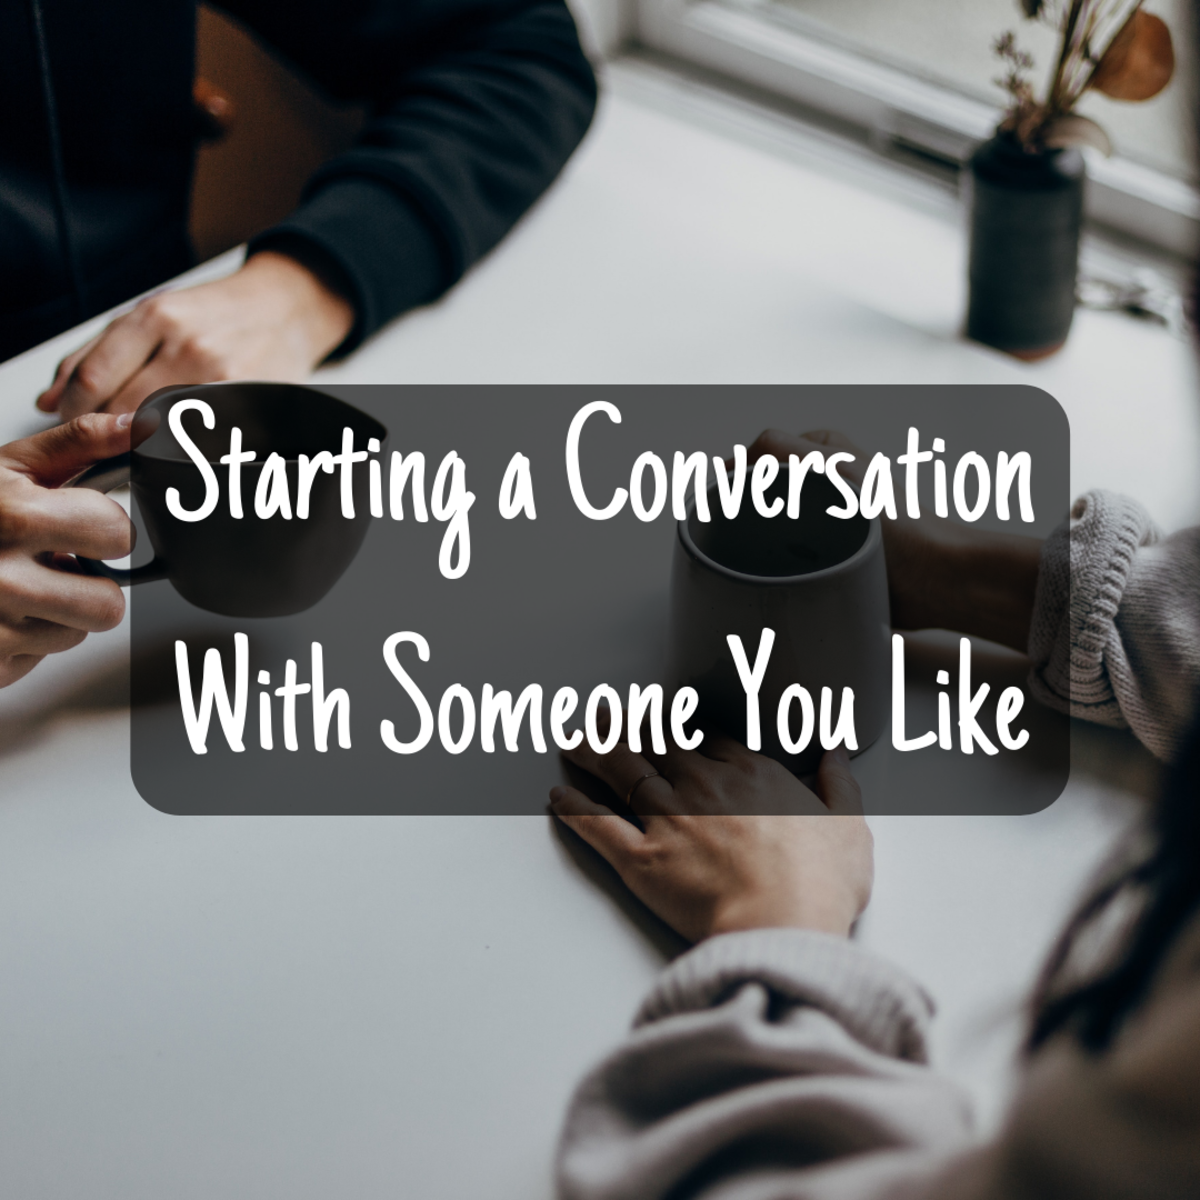 Read on to learn tips on how to strike up a conversation with someone you like. You'll learn easy-to-follow phases that will help you initiate and maintain a great conversation.